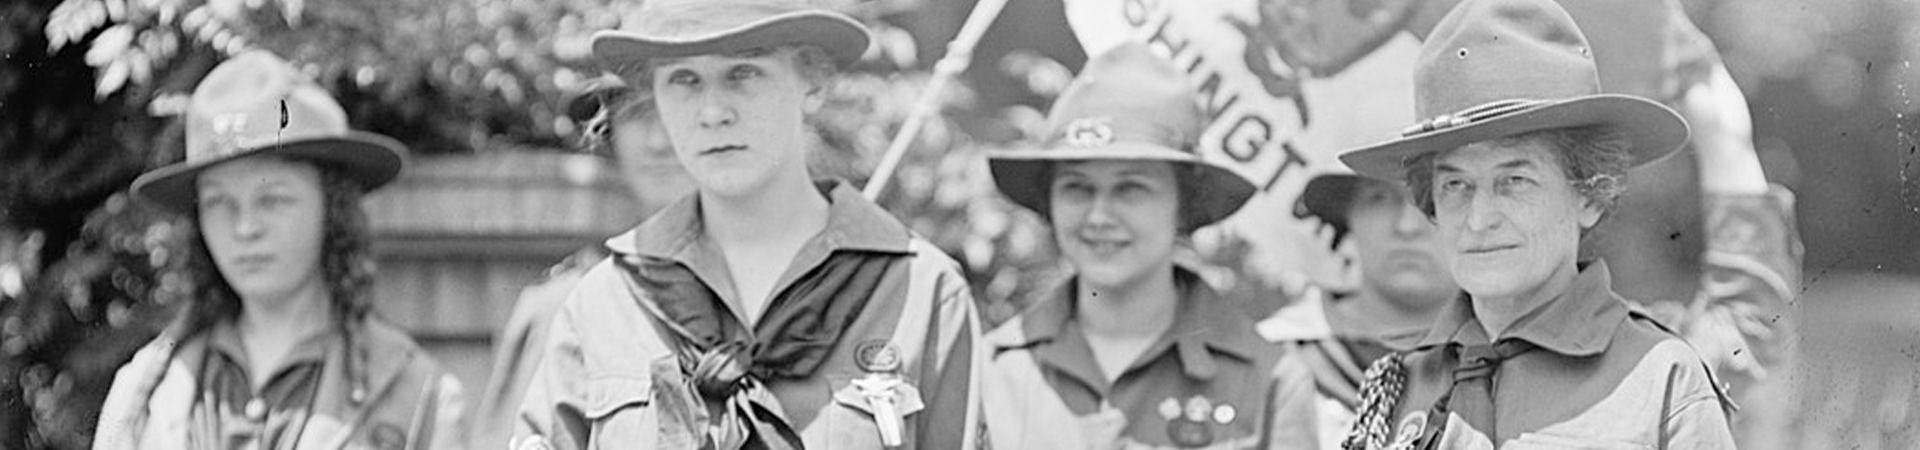  Early girl scouts holding a girl scouts flag with Juliette Gordon Low standing on the far right. 